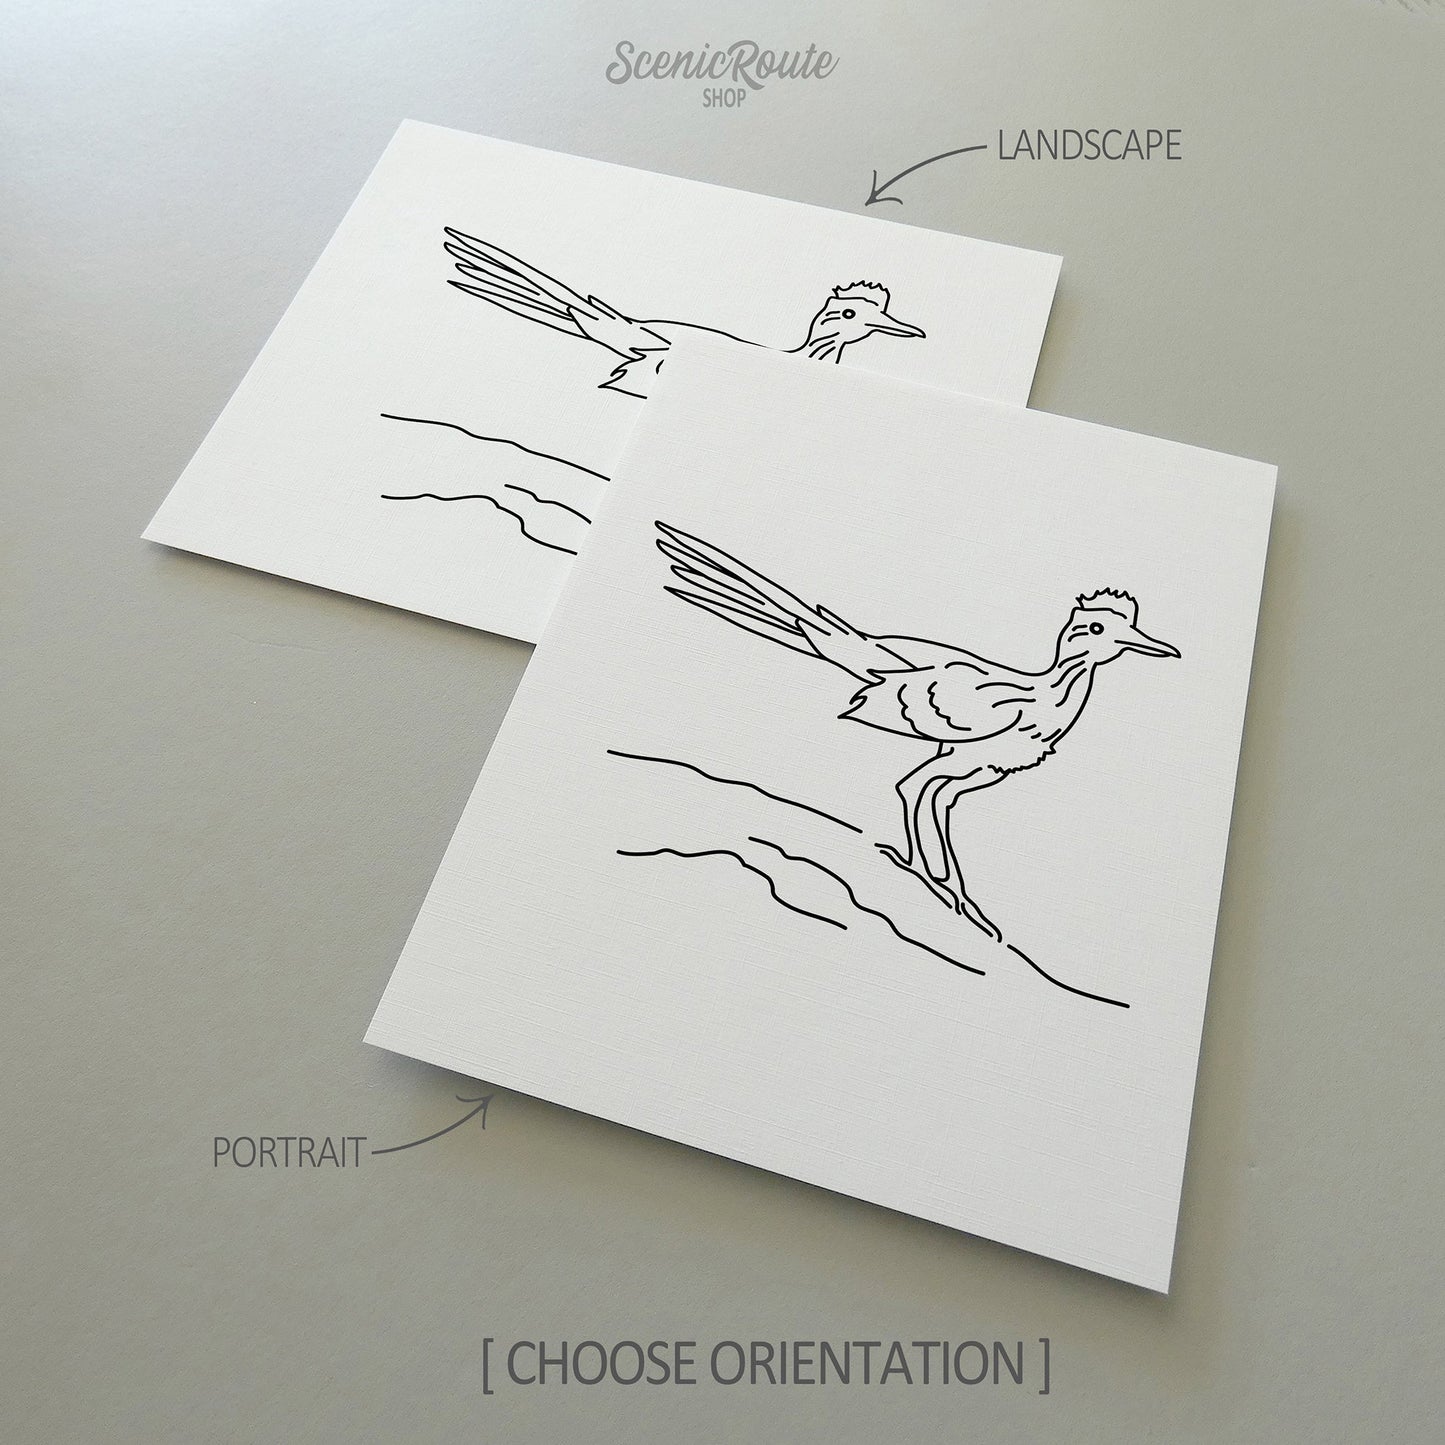 Two line art drawings of a Roadrunner on white linen paper with a gray background.  The pieces are shown in portrait and landscape orientation for the available art print options.